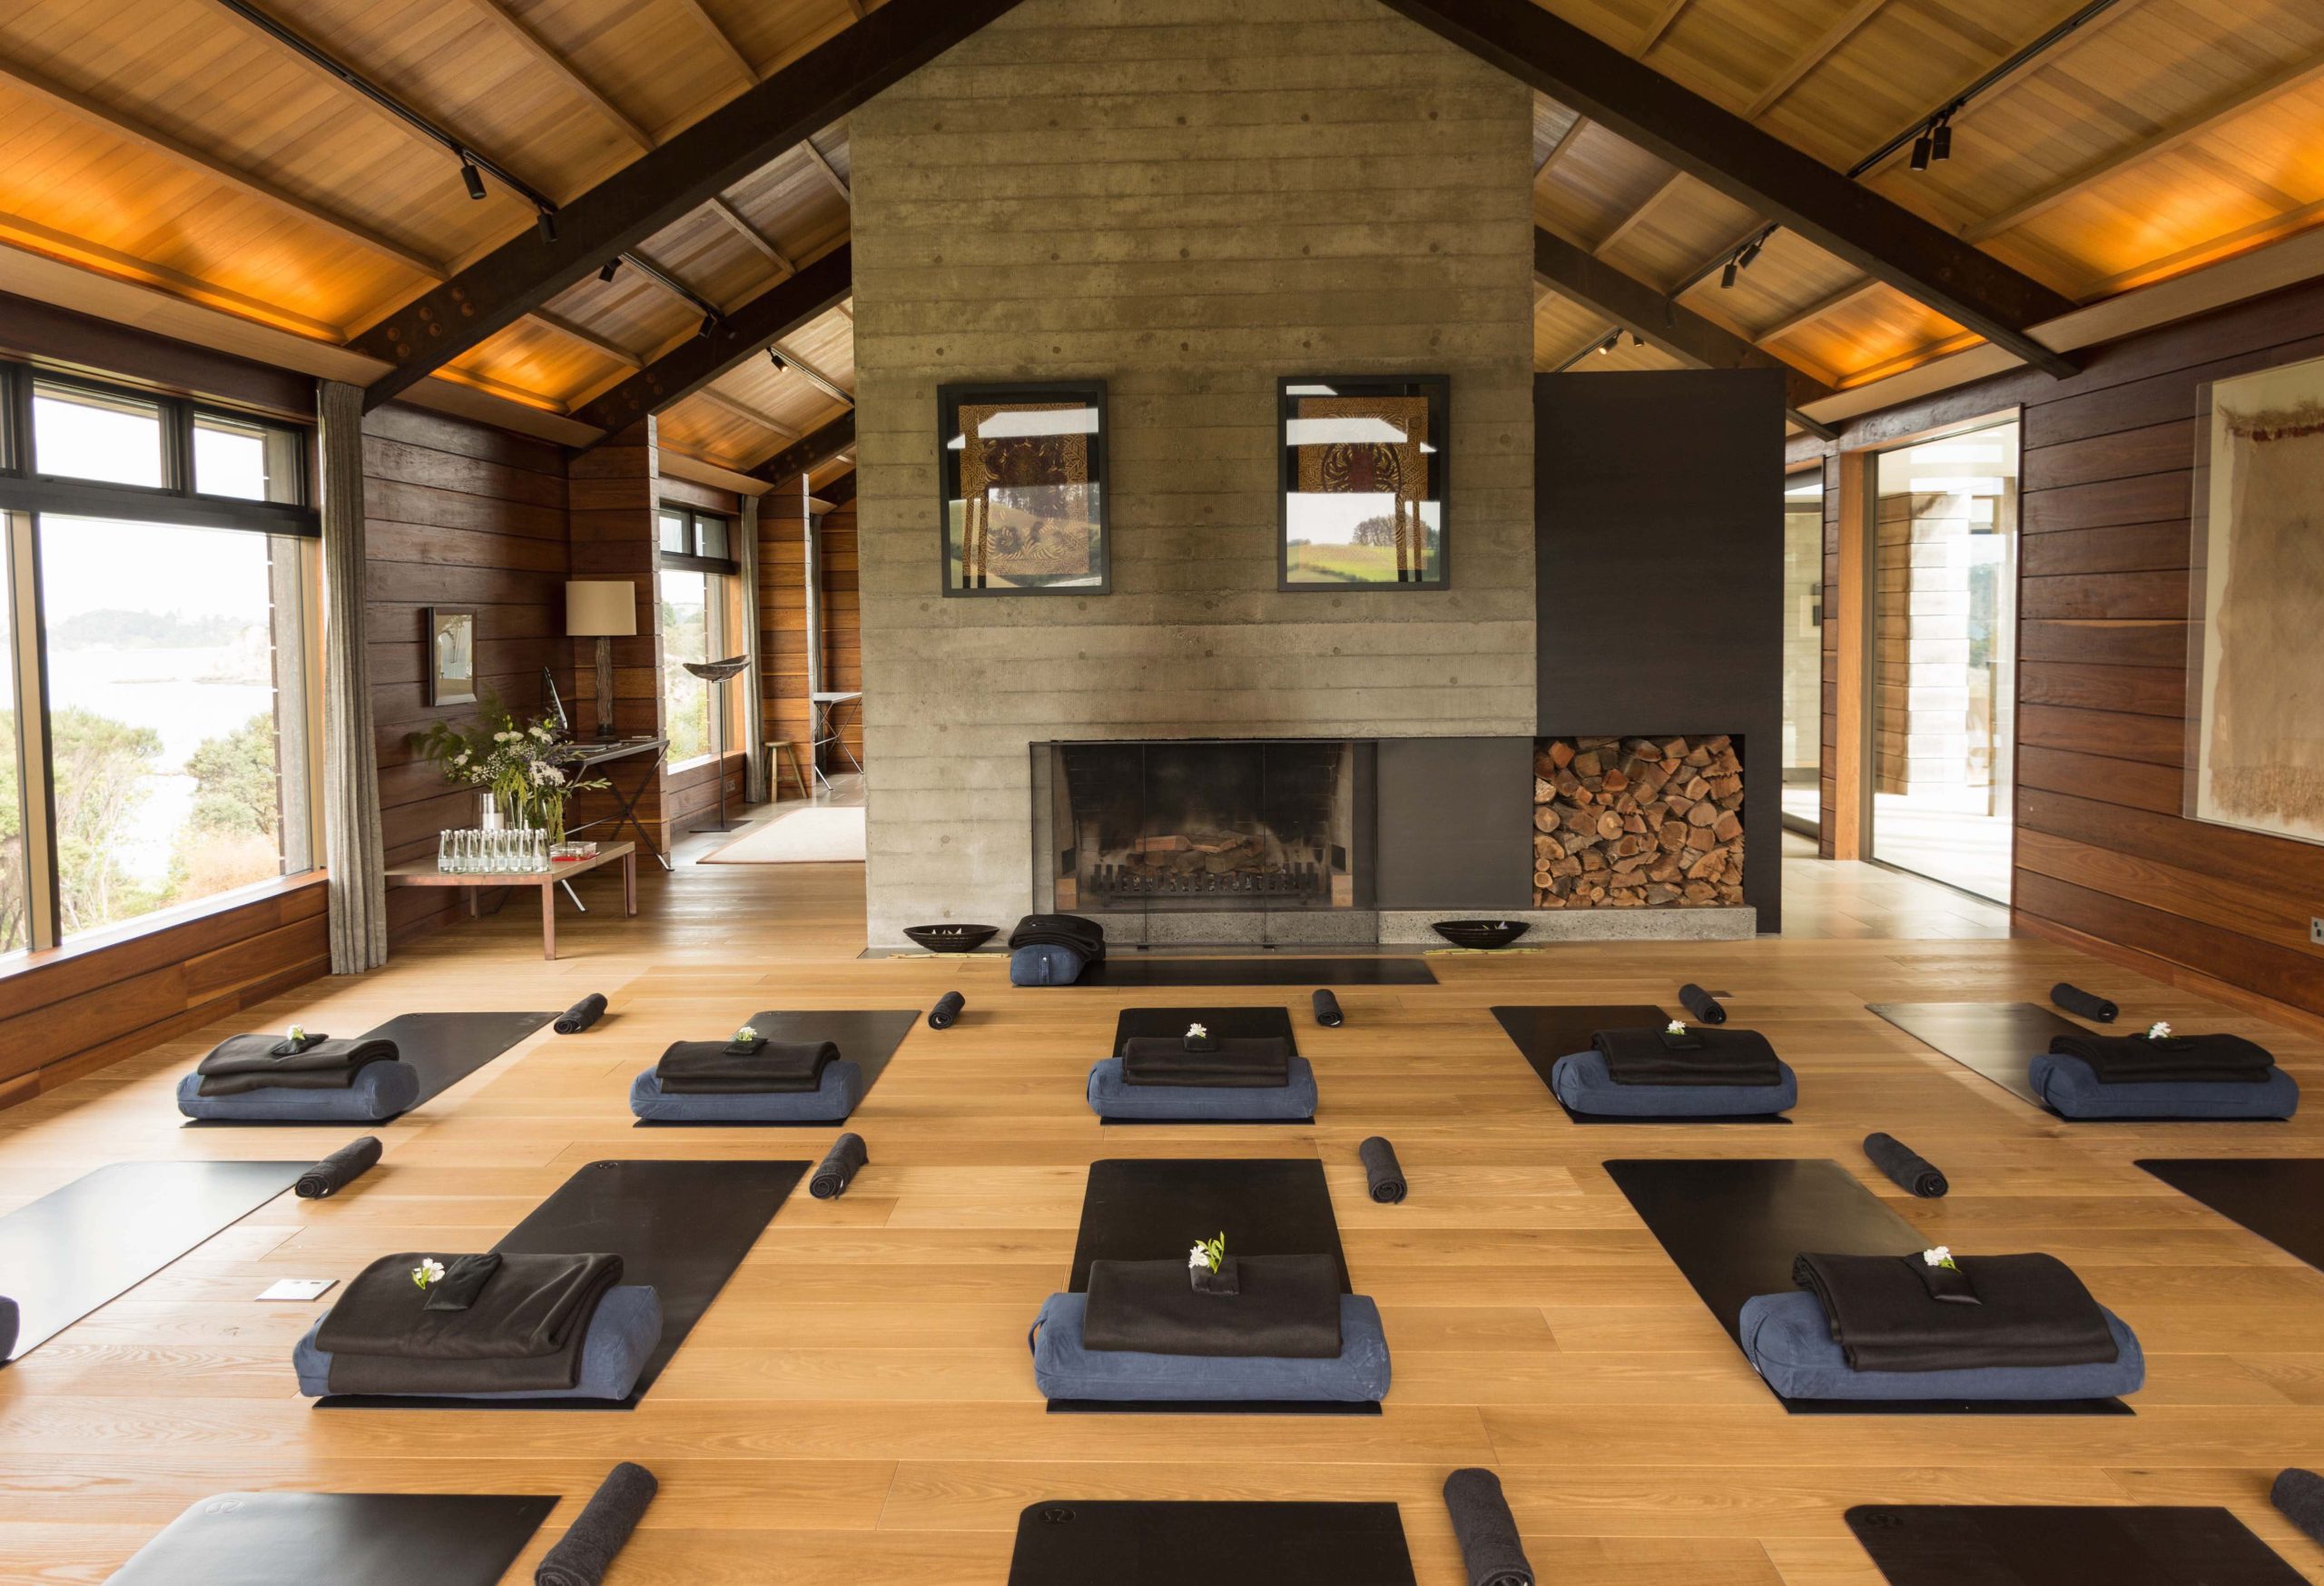 Wind Down With A Wellness Stay in Northland